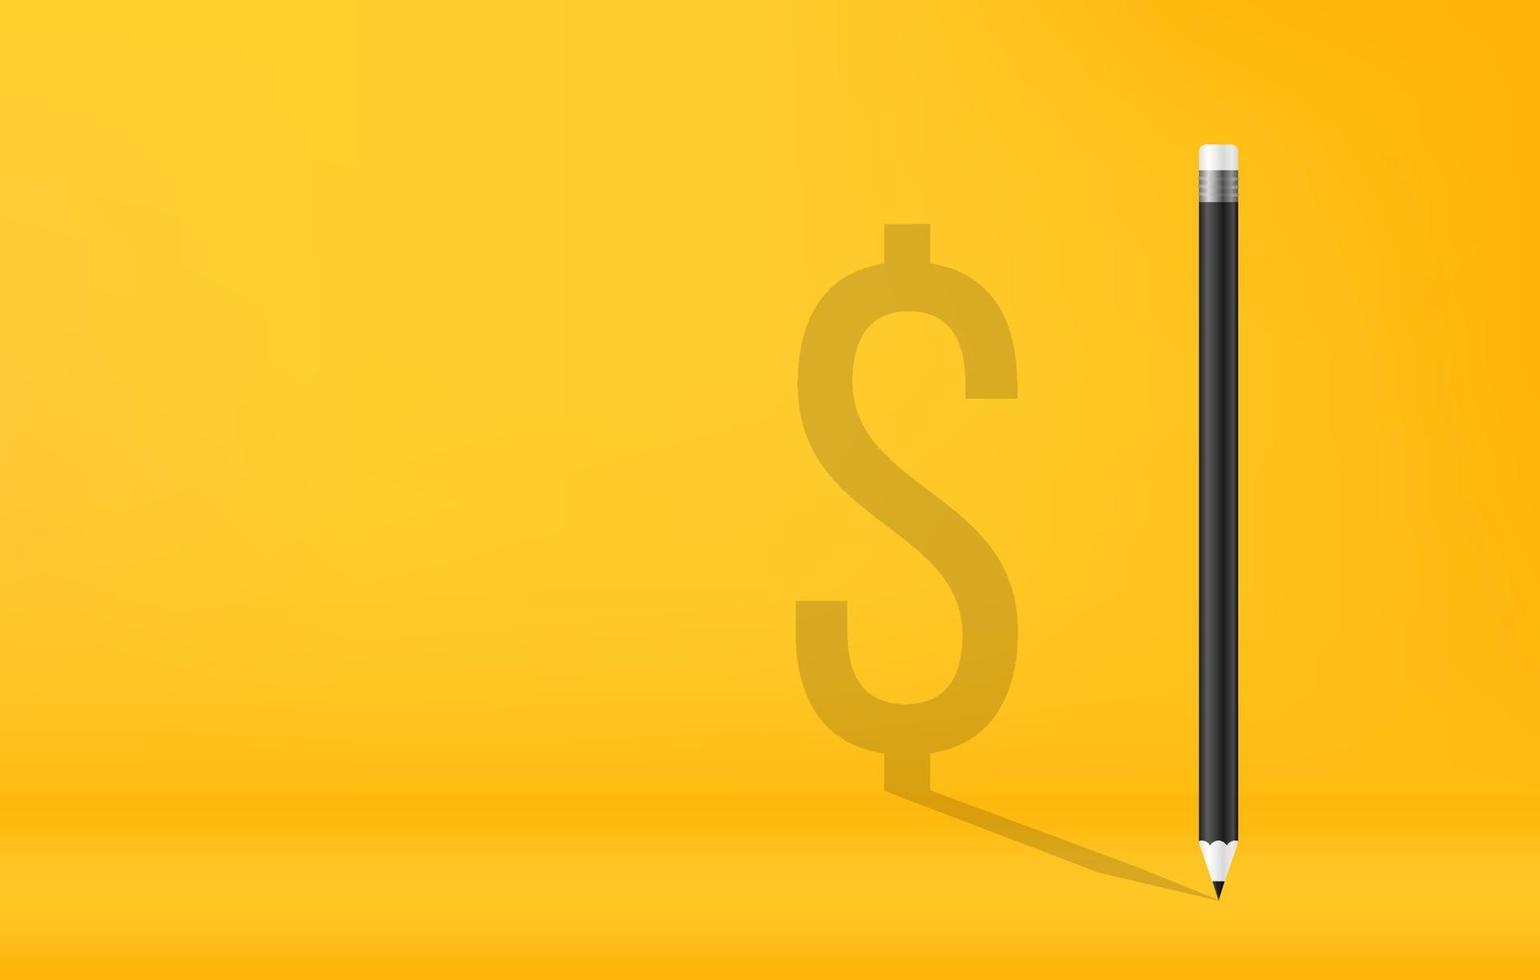 Pencils with US dollar currency symbol shadow on yellow background vector